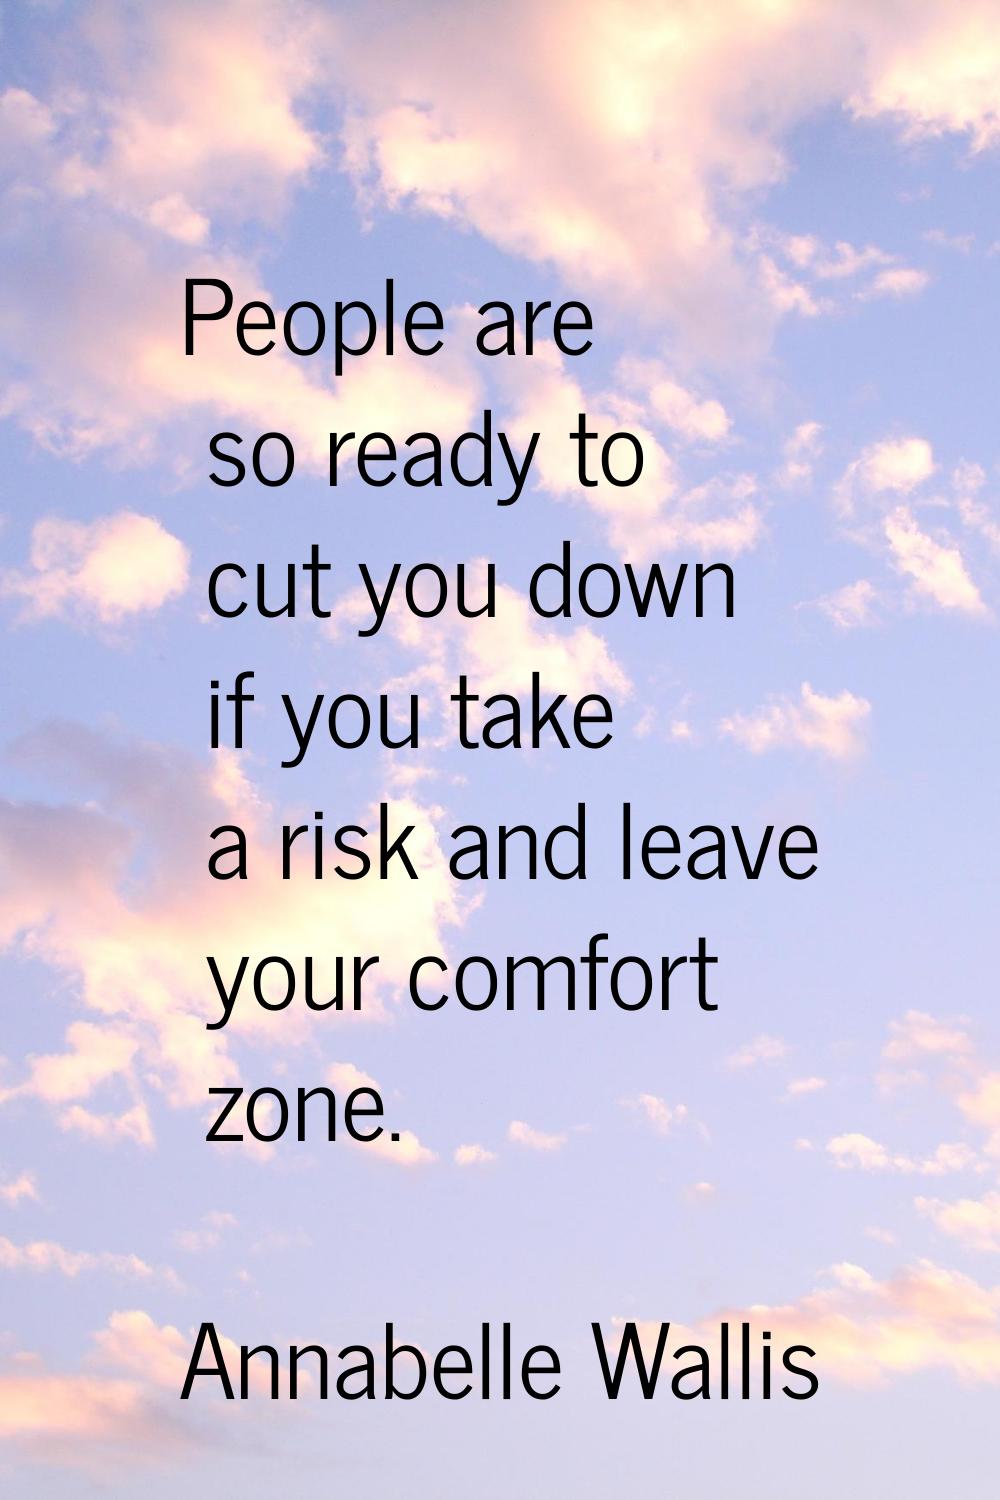 People are so ready to cut you down if you take a risk and leave your comfort zone.